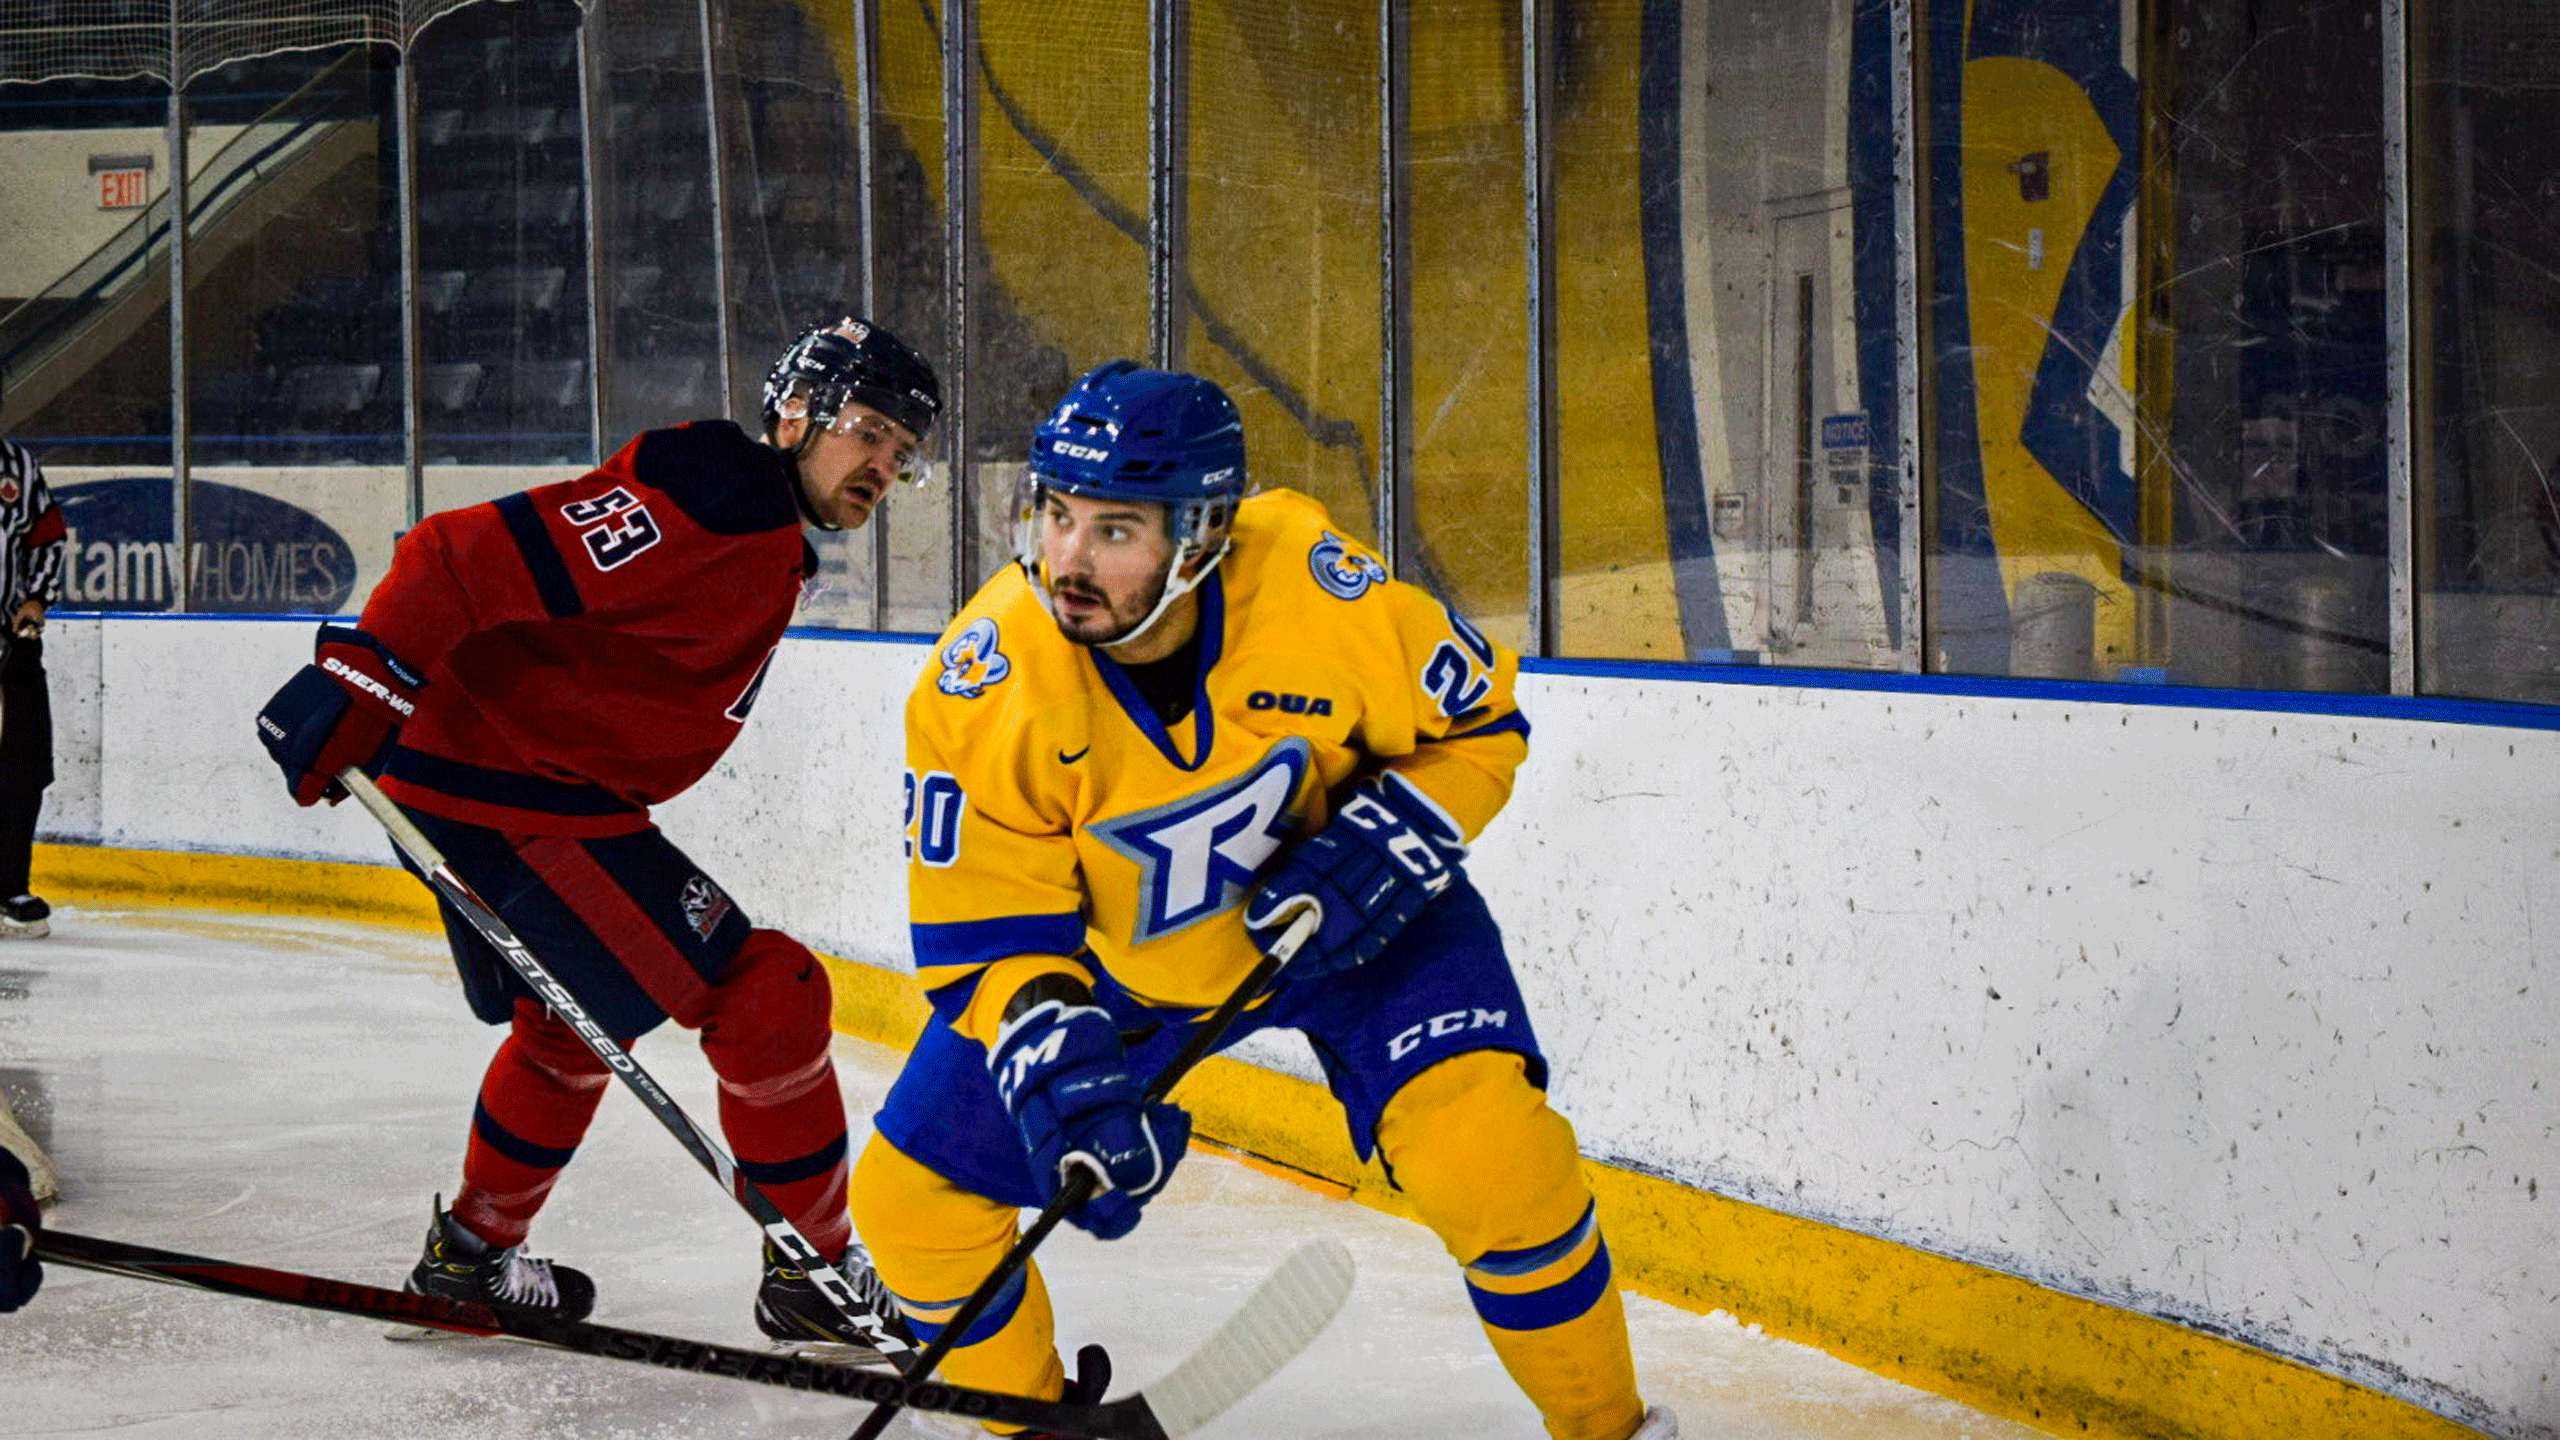 A Rams men's hockey player in a gold jersey chases the puck